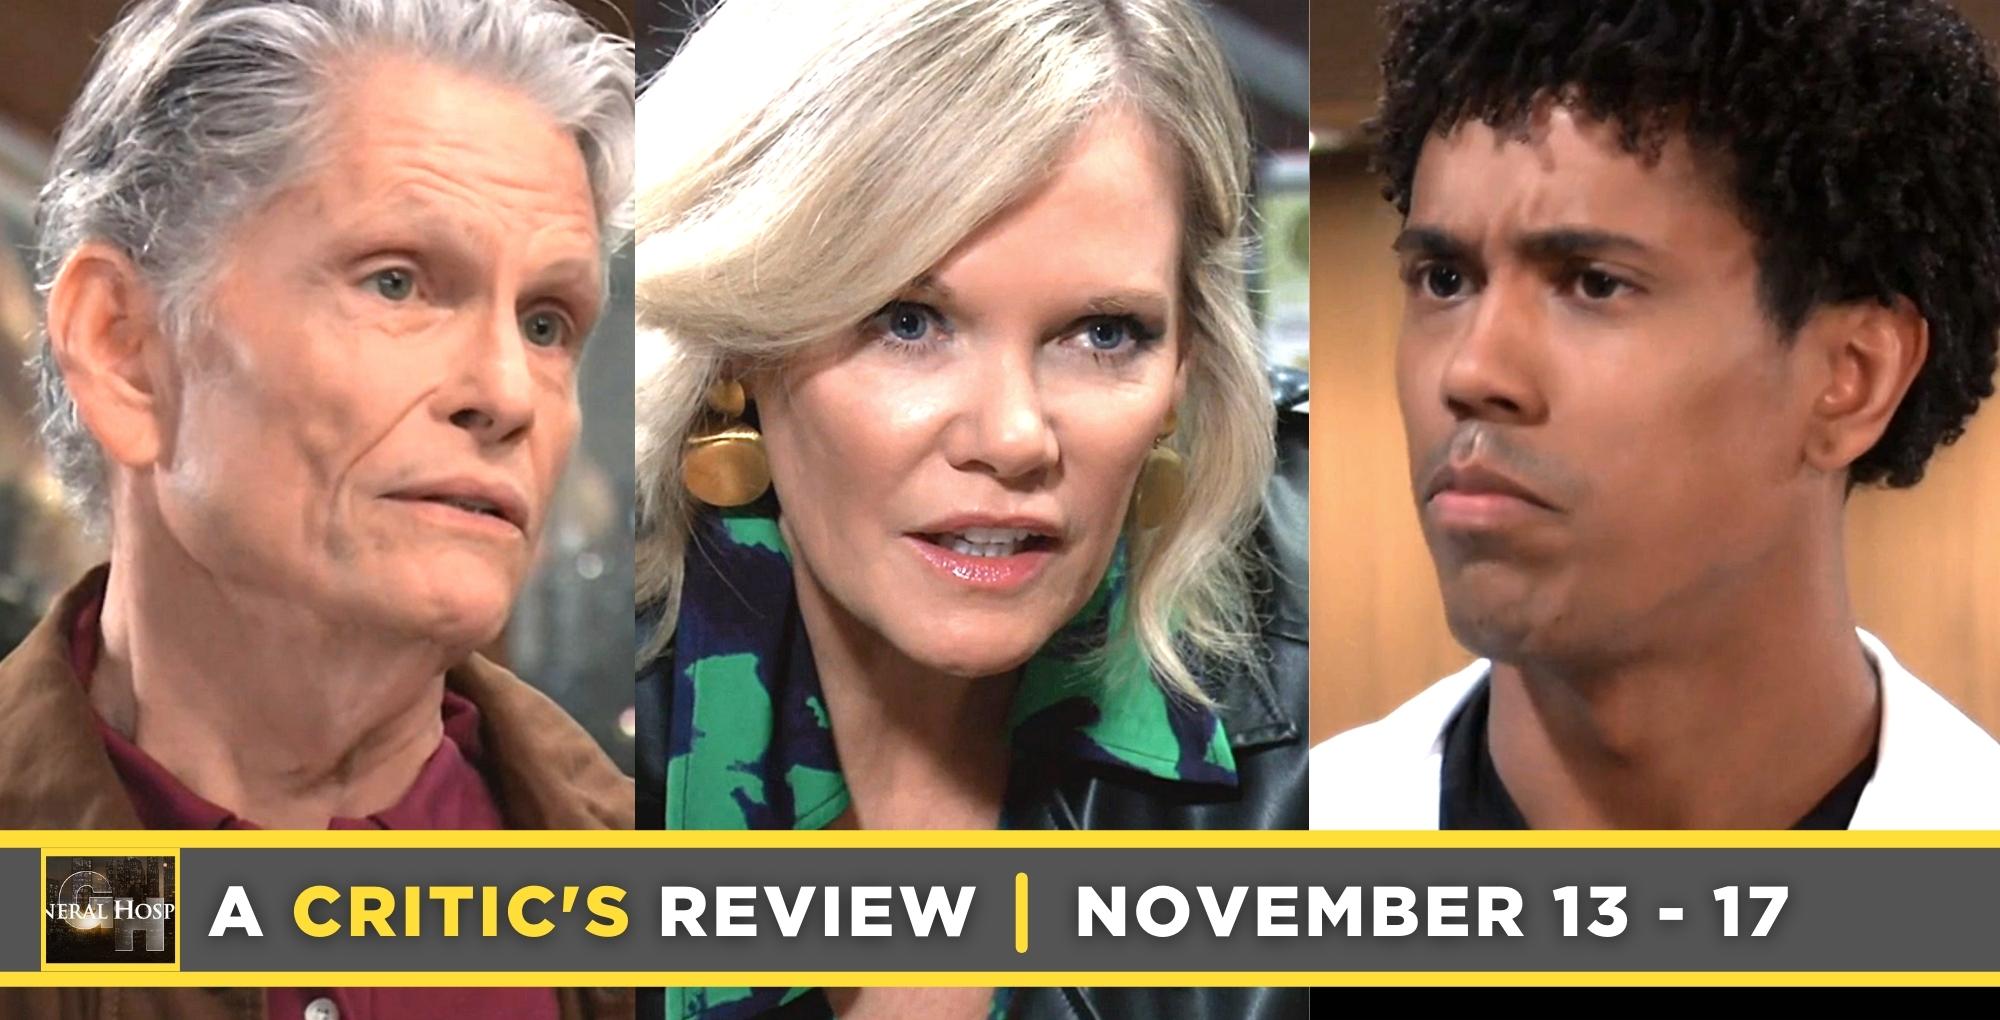 general hospital critic's review for november 13 – november 17, 2023, three images, cyrus, ava, and tj.